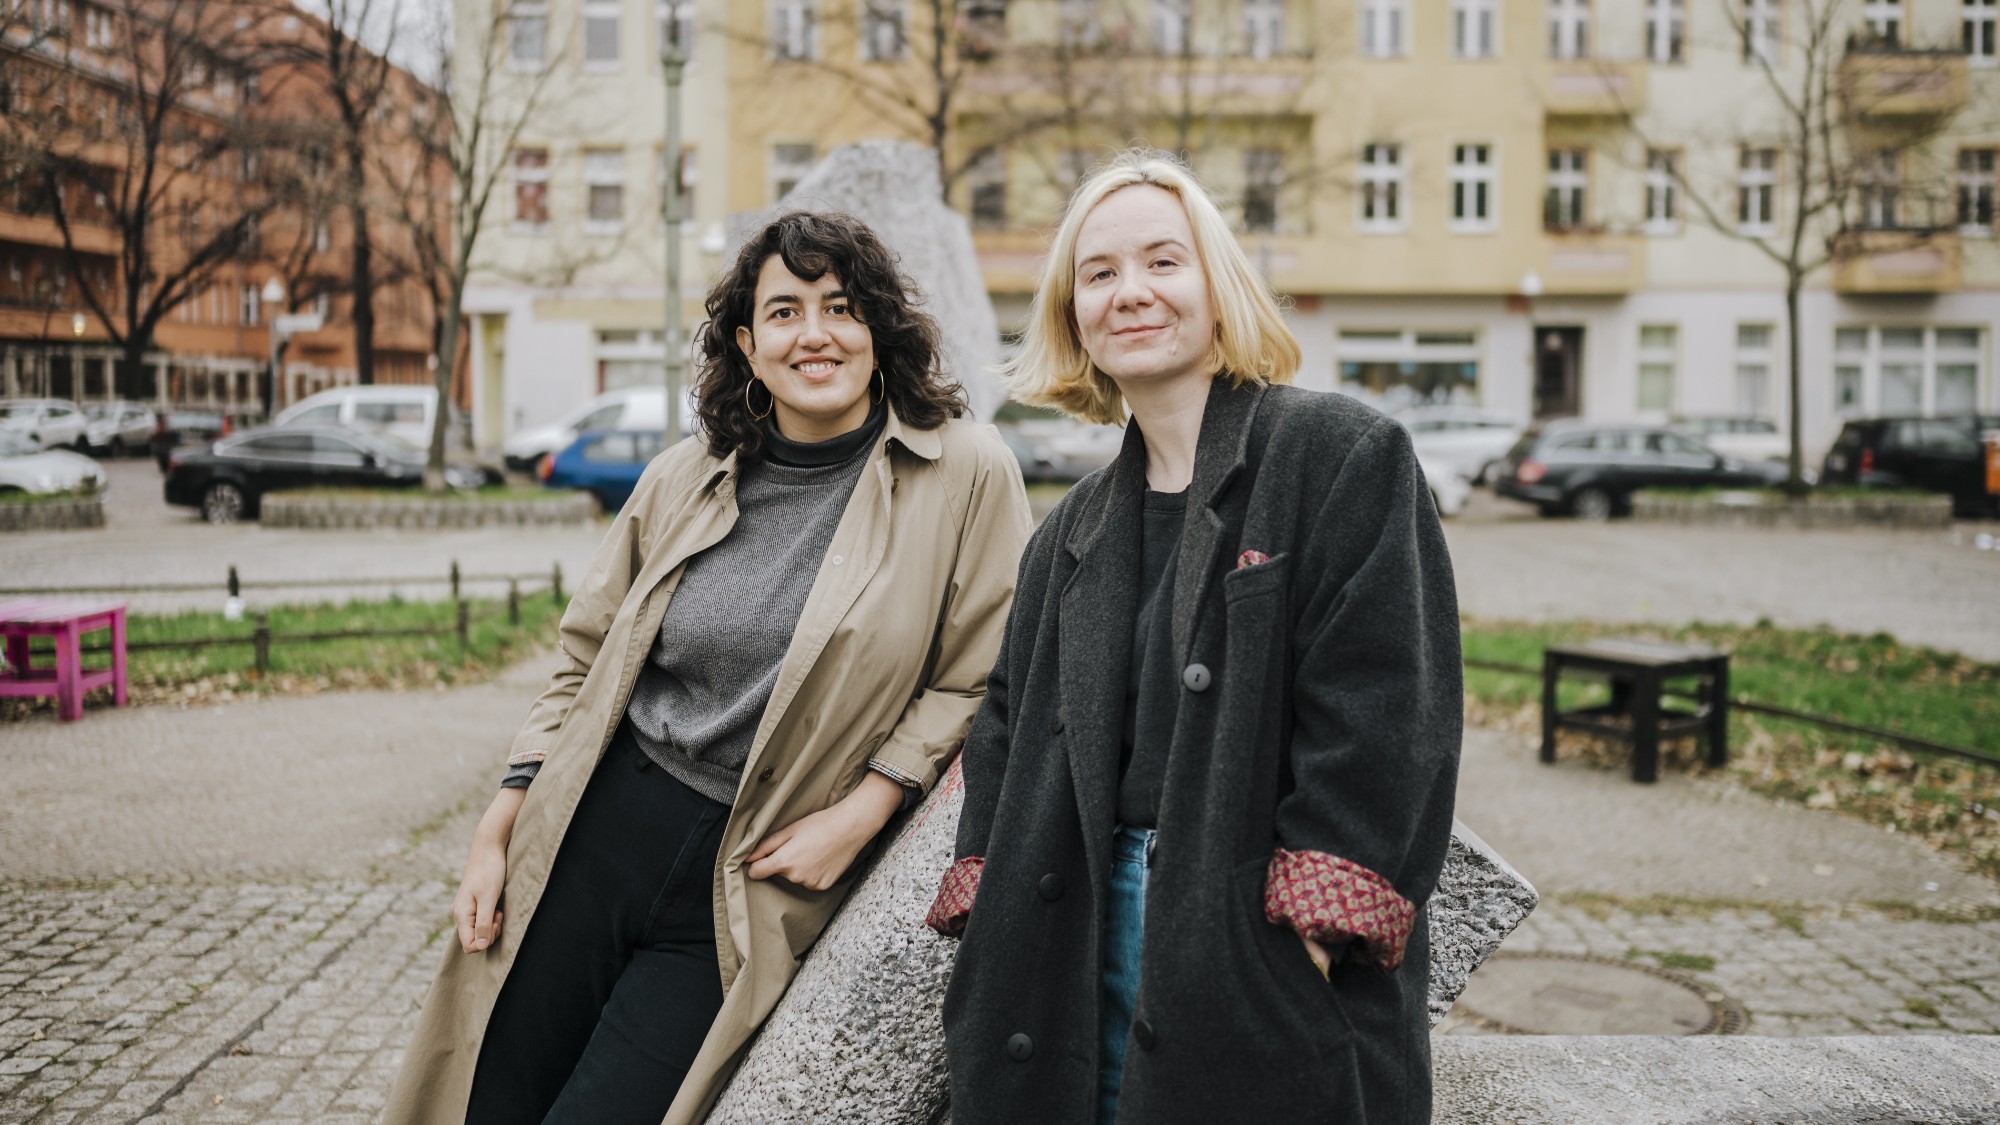 About the enduring love of friendship with Mikaella Clements and Onjuli Datta